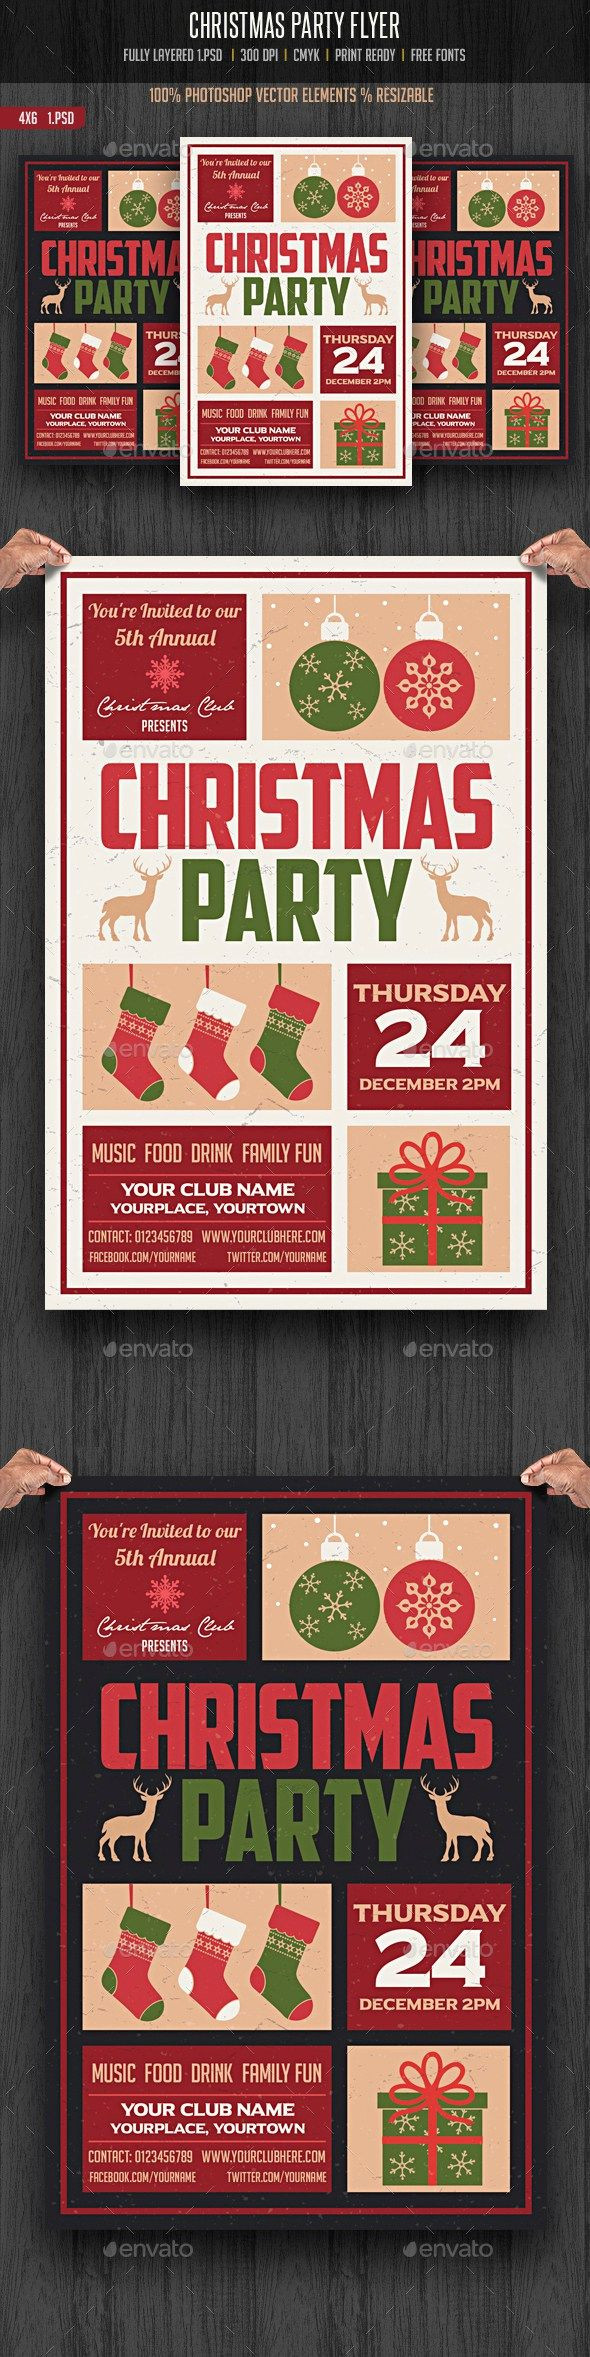 Holiday Party Flyer Ideas
 Christmas Party Flyer